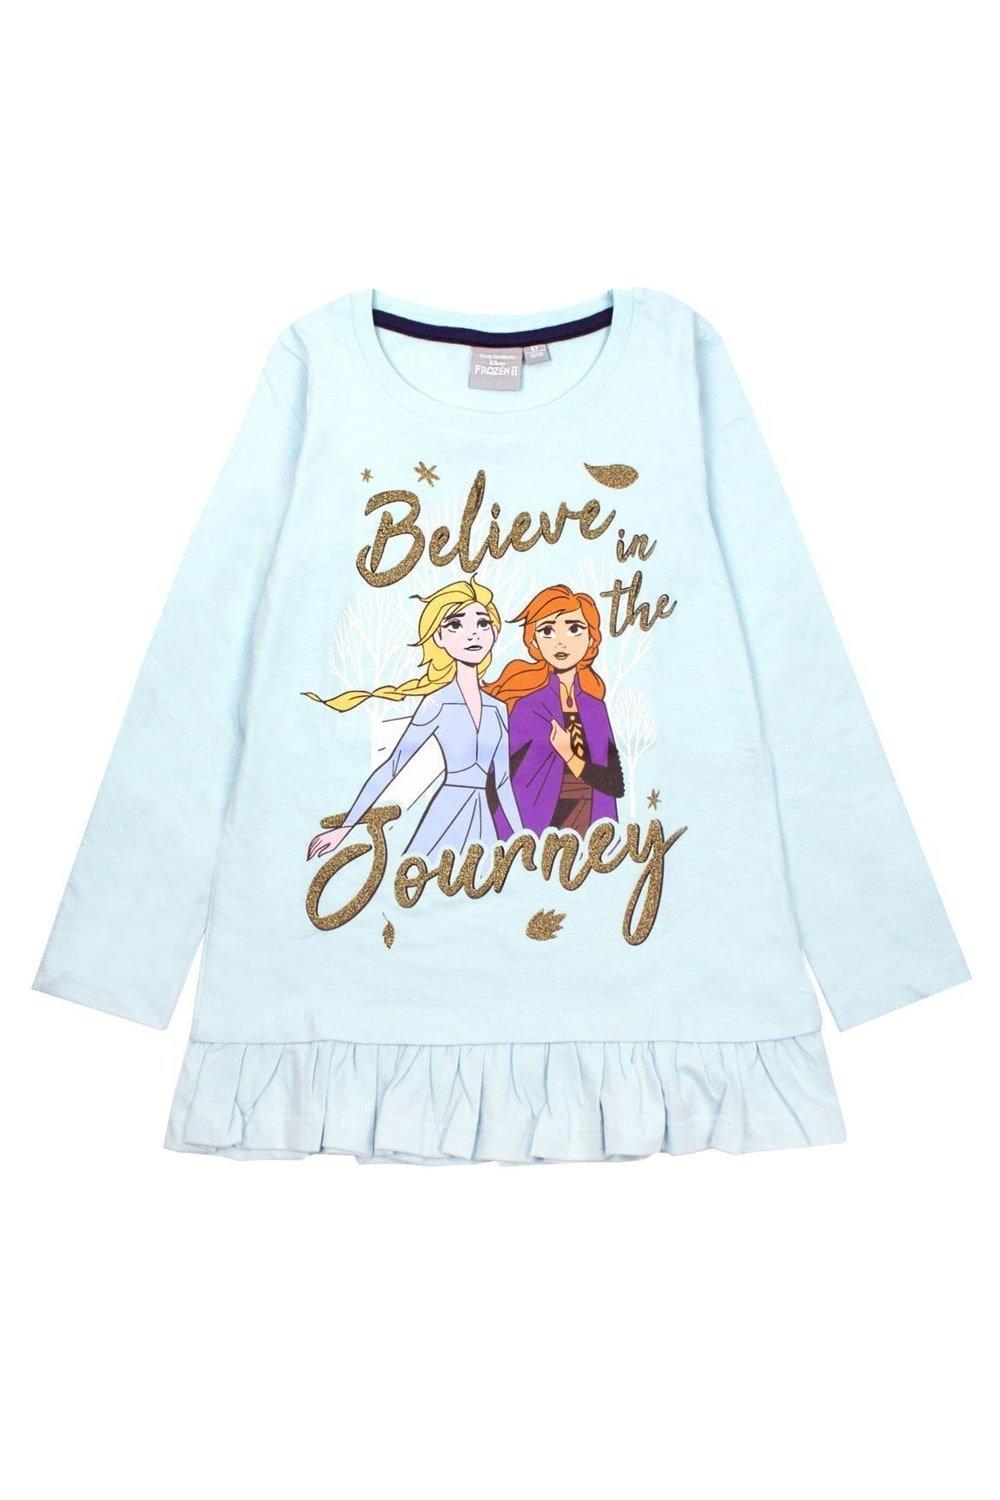 Believe In The Journey Frill Long-Sleeved T-Shirt